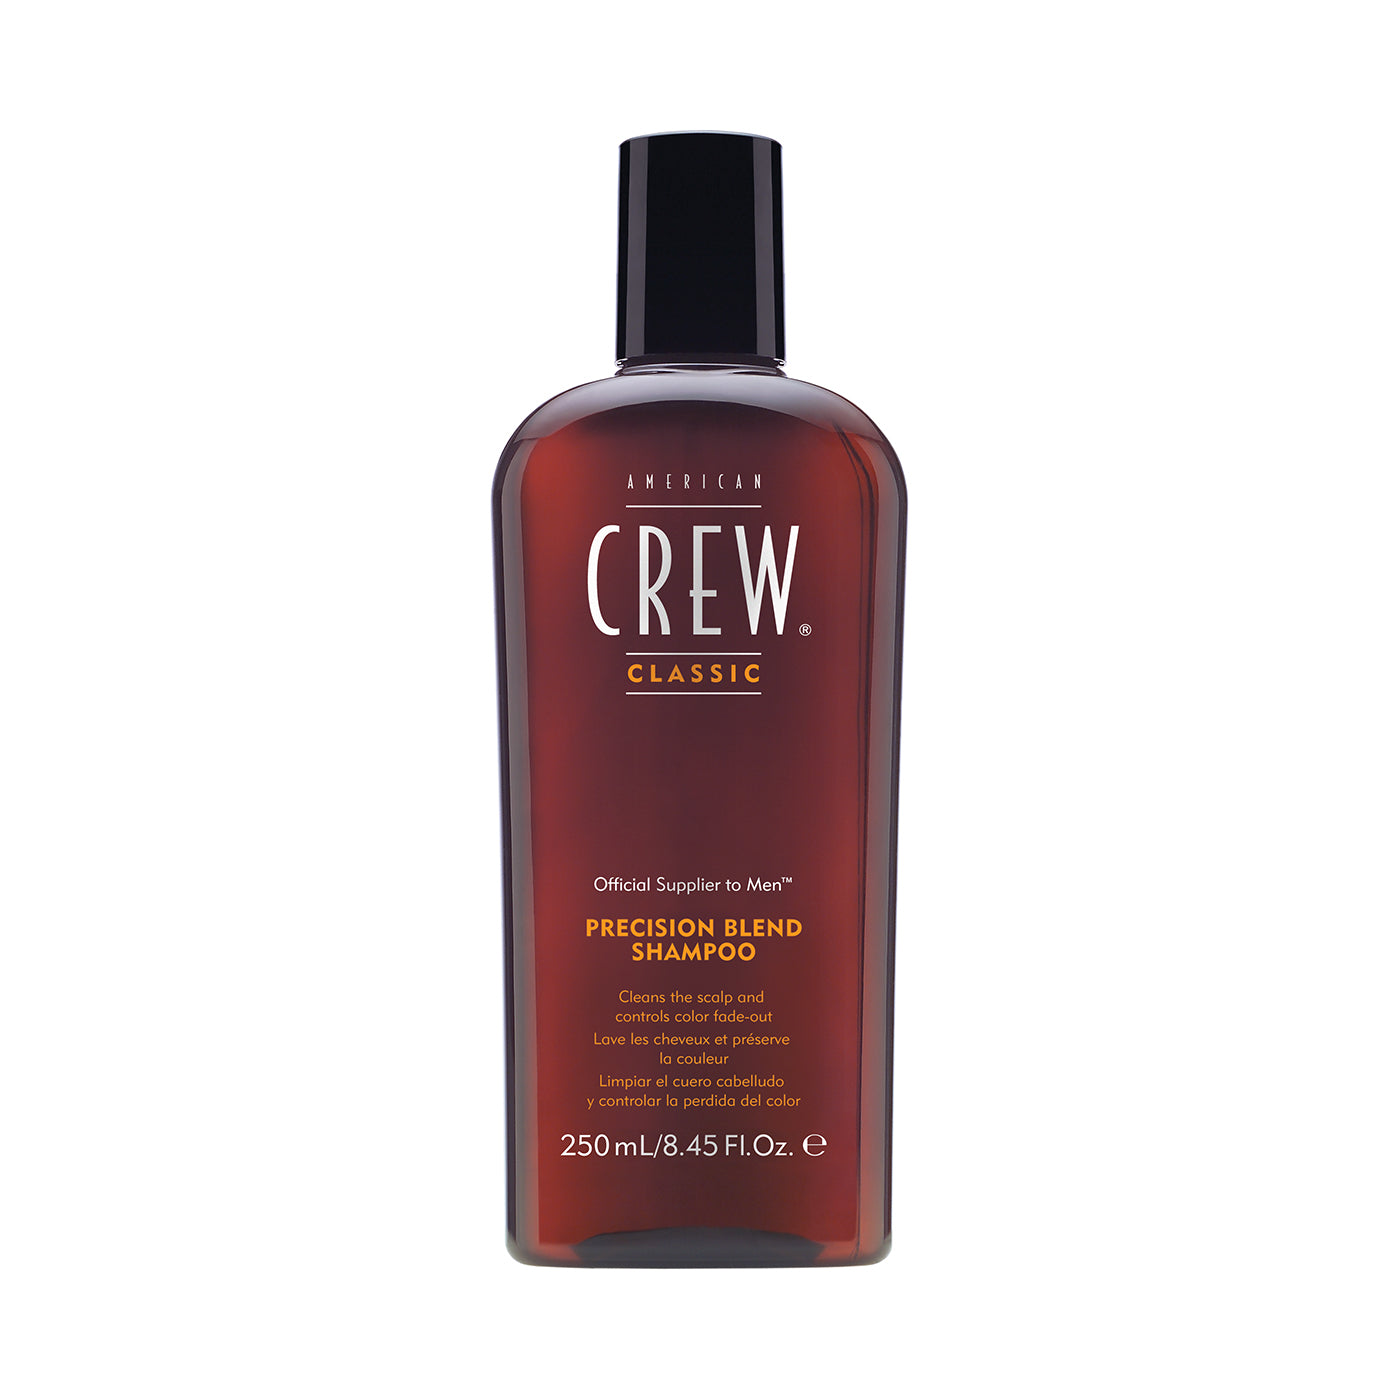 American Crew Precision Blend Shampoo (250ml) - Ultimate Hair and Beauty